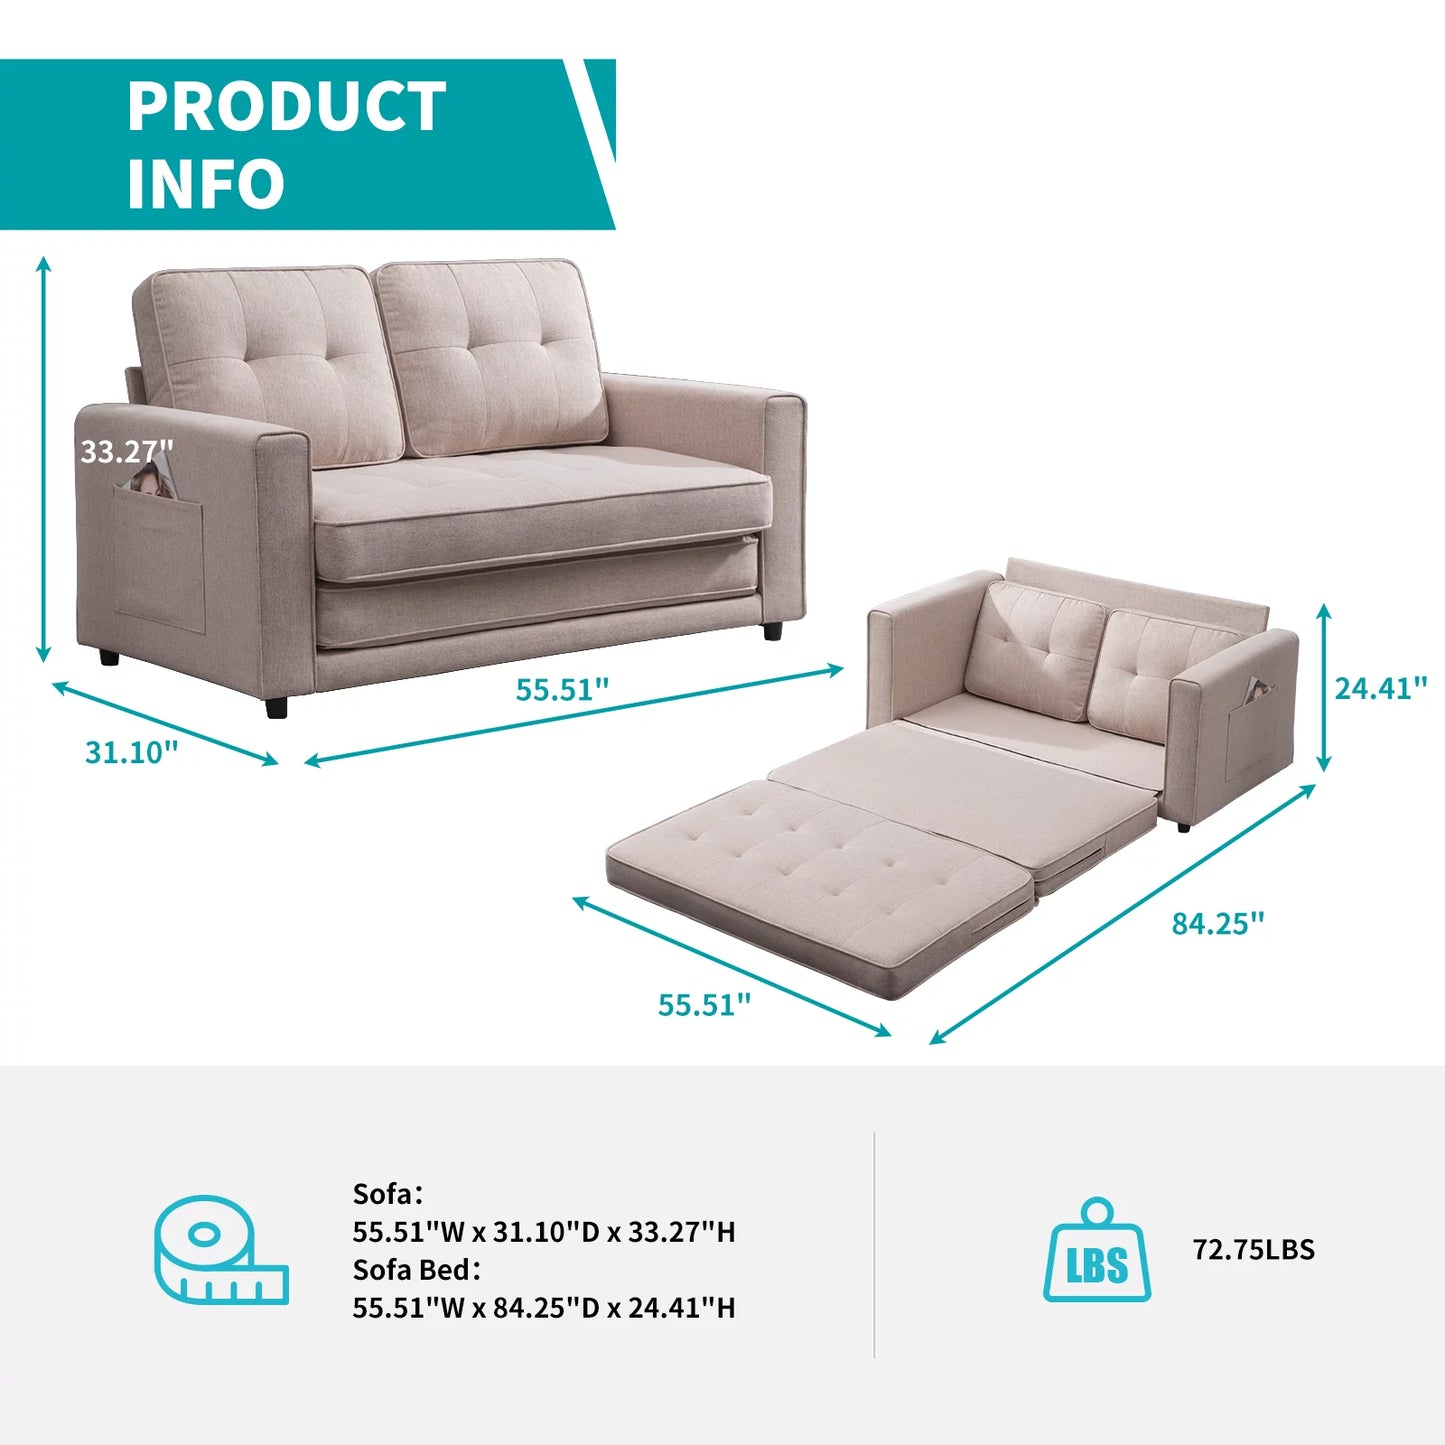 BALUS Sofa Bed, Upholstered Love-seat Couch,futon sofa sleeper, Living room Furniture sofa couch, Pull out sofa bed, Convertible Folding sofa for Living Room, Apartment, Light Grey